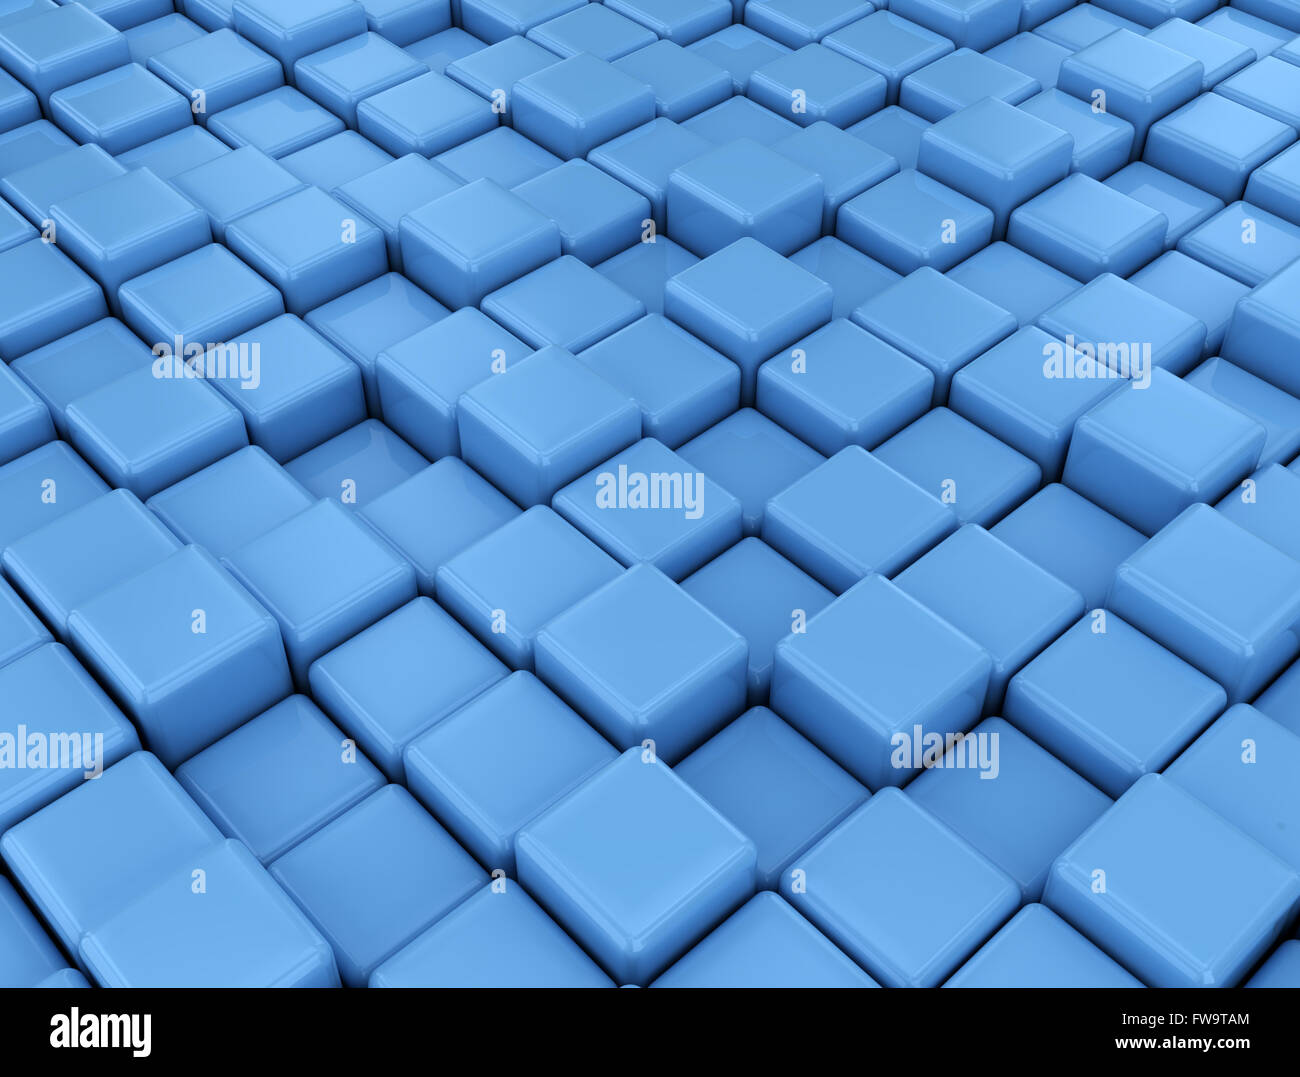 Abstract digital illustration blue cubes background Stock Photo